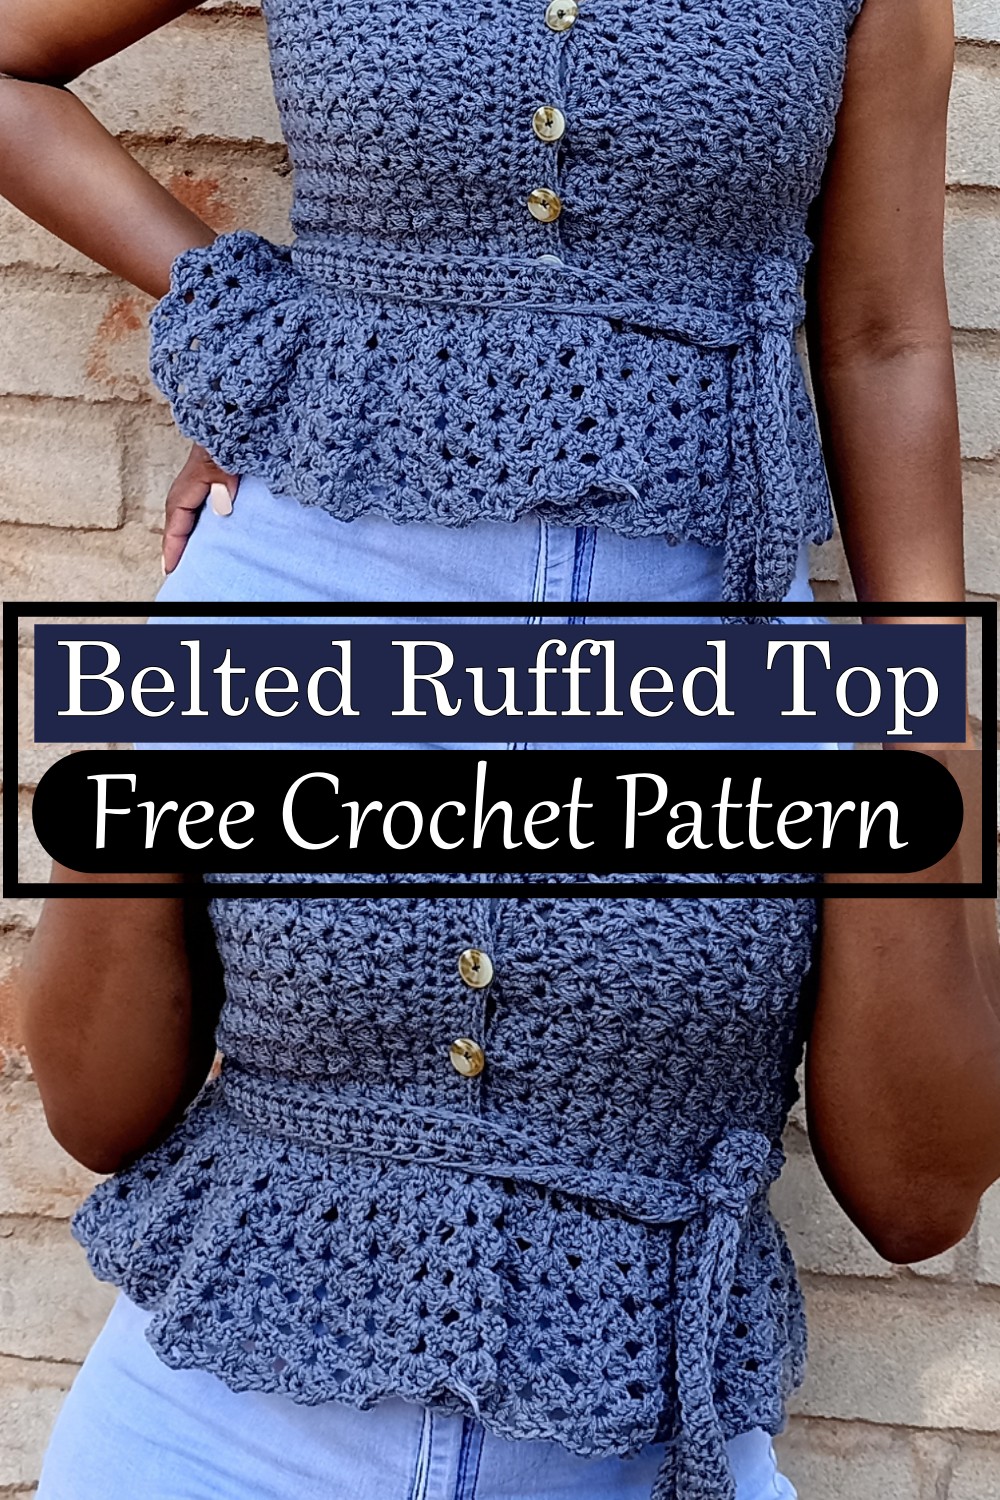 Belted Ruffled Top